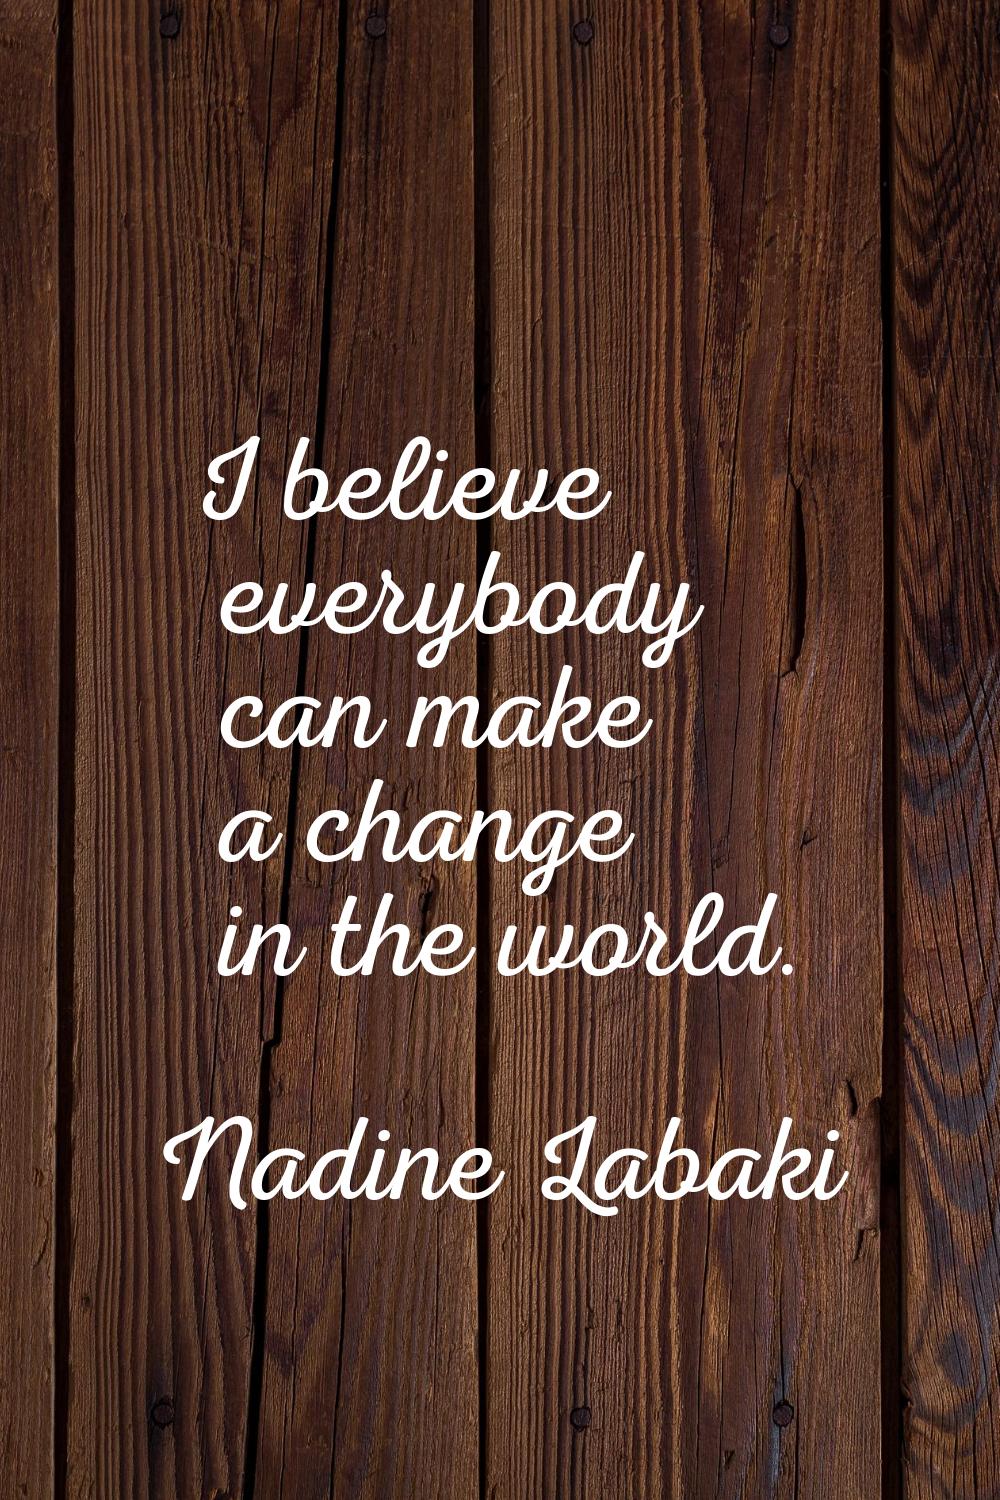 I believe everybody can make a change in the world.